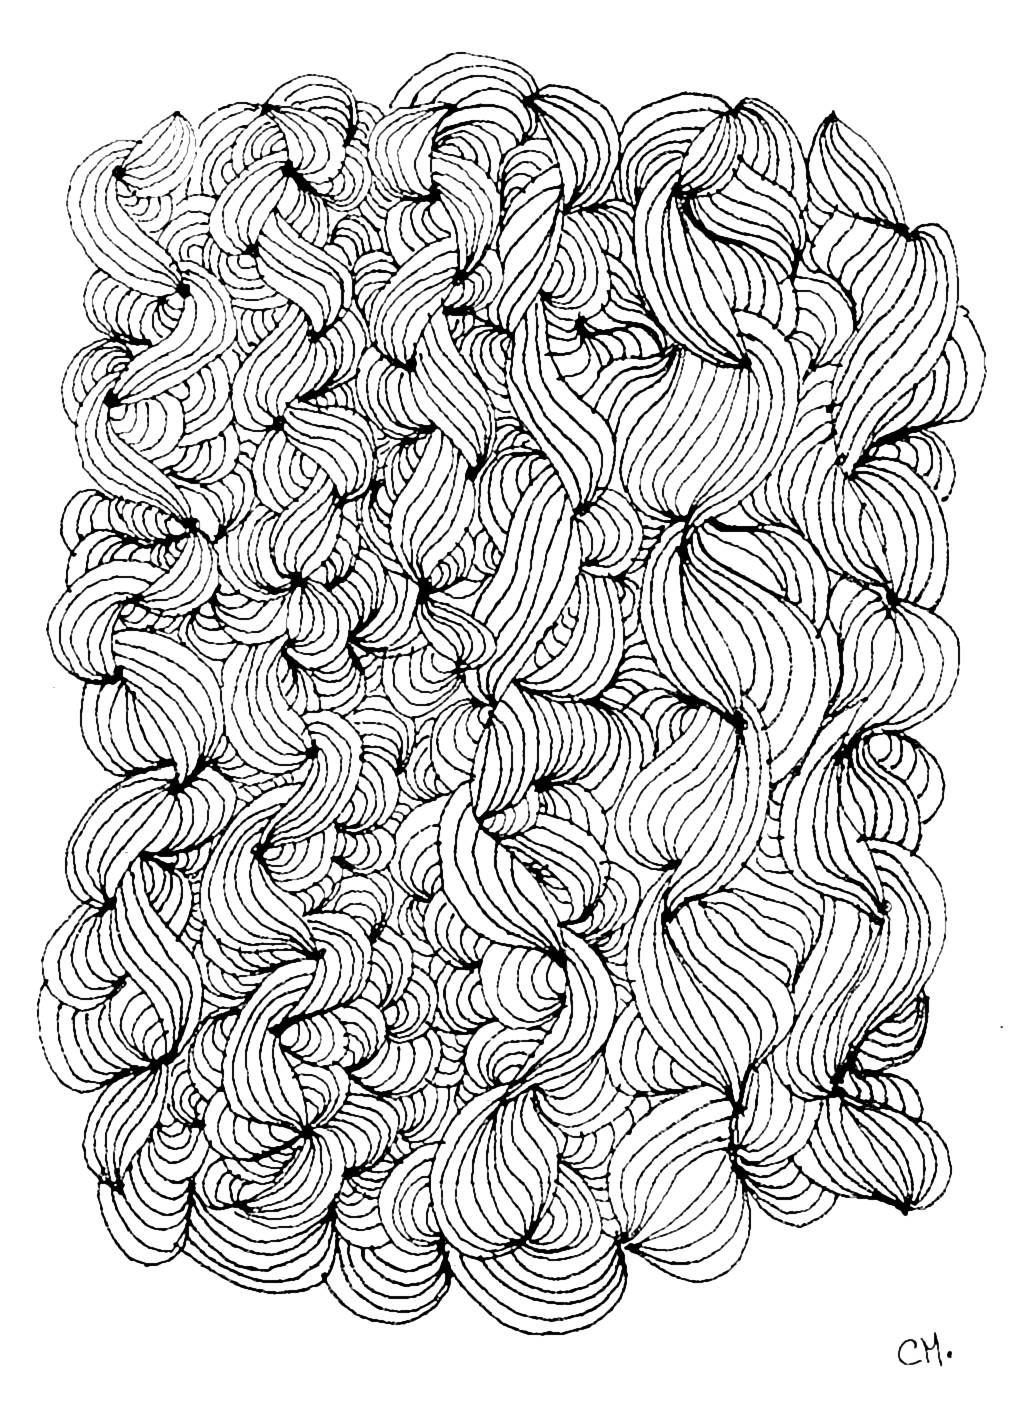 Zentangle by cathym 3 - Zentangle Adult Coloring Pages - Page 4